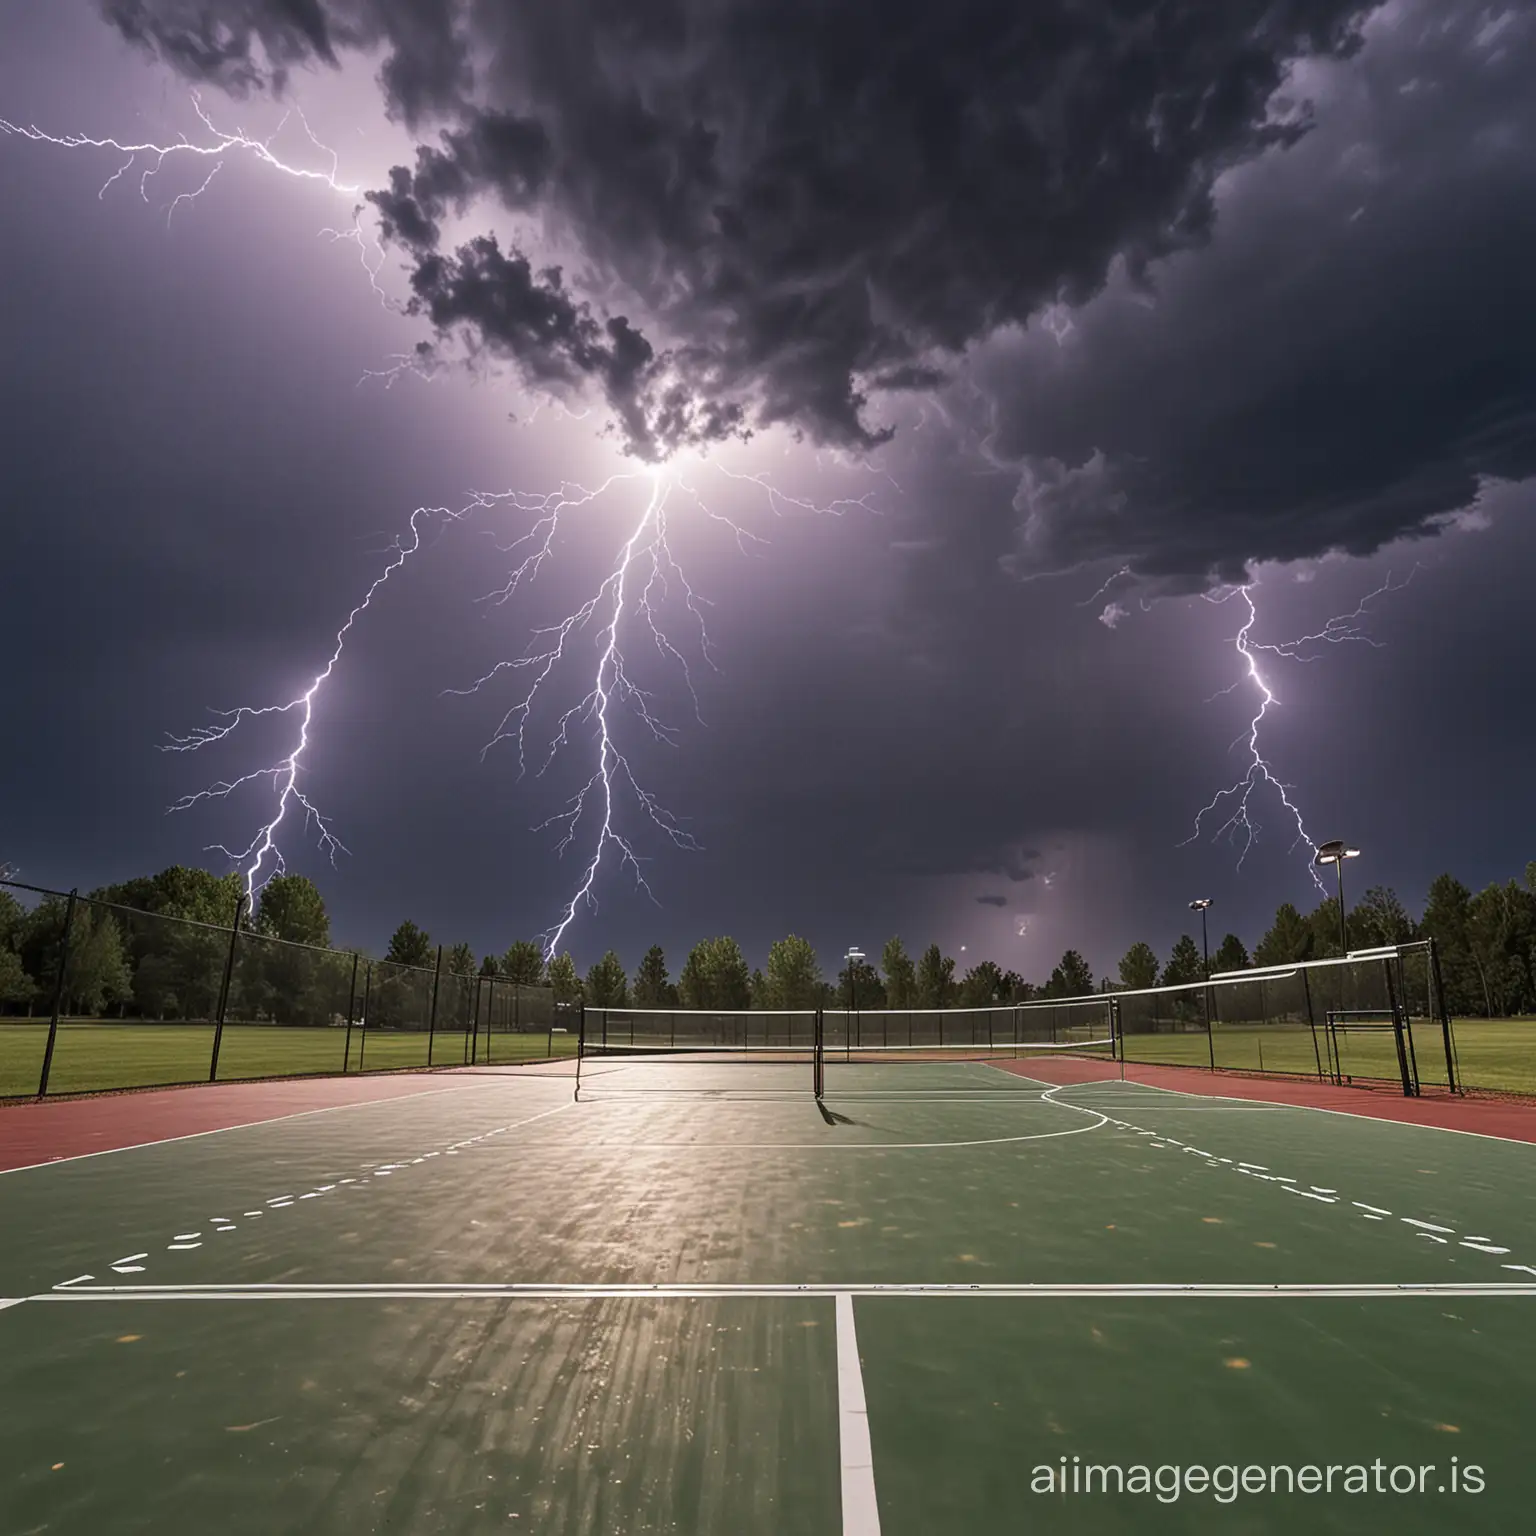 Outdoor-Pickleball-Match-Under-Dramatic-Cloudy-Sky-with-Lightning